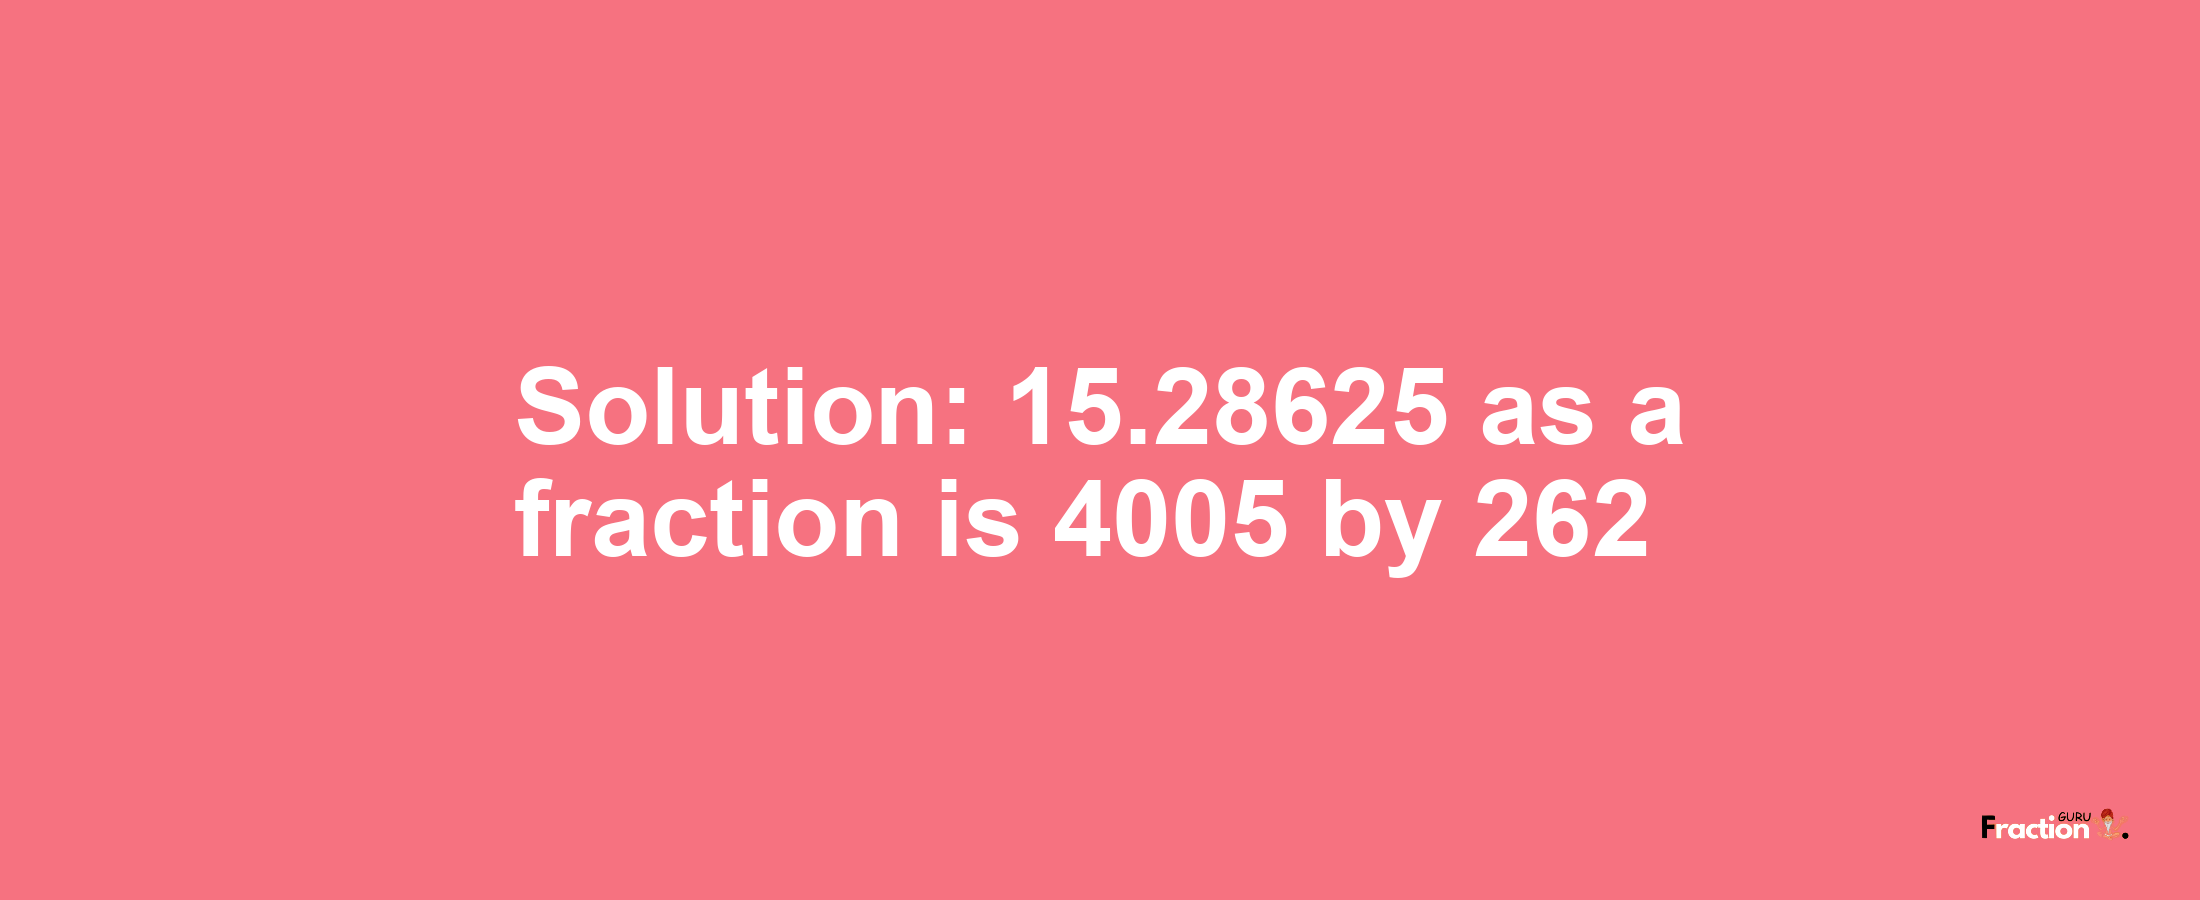 Solution:15.28625 as a fraction is 4005/262